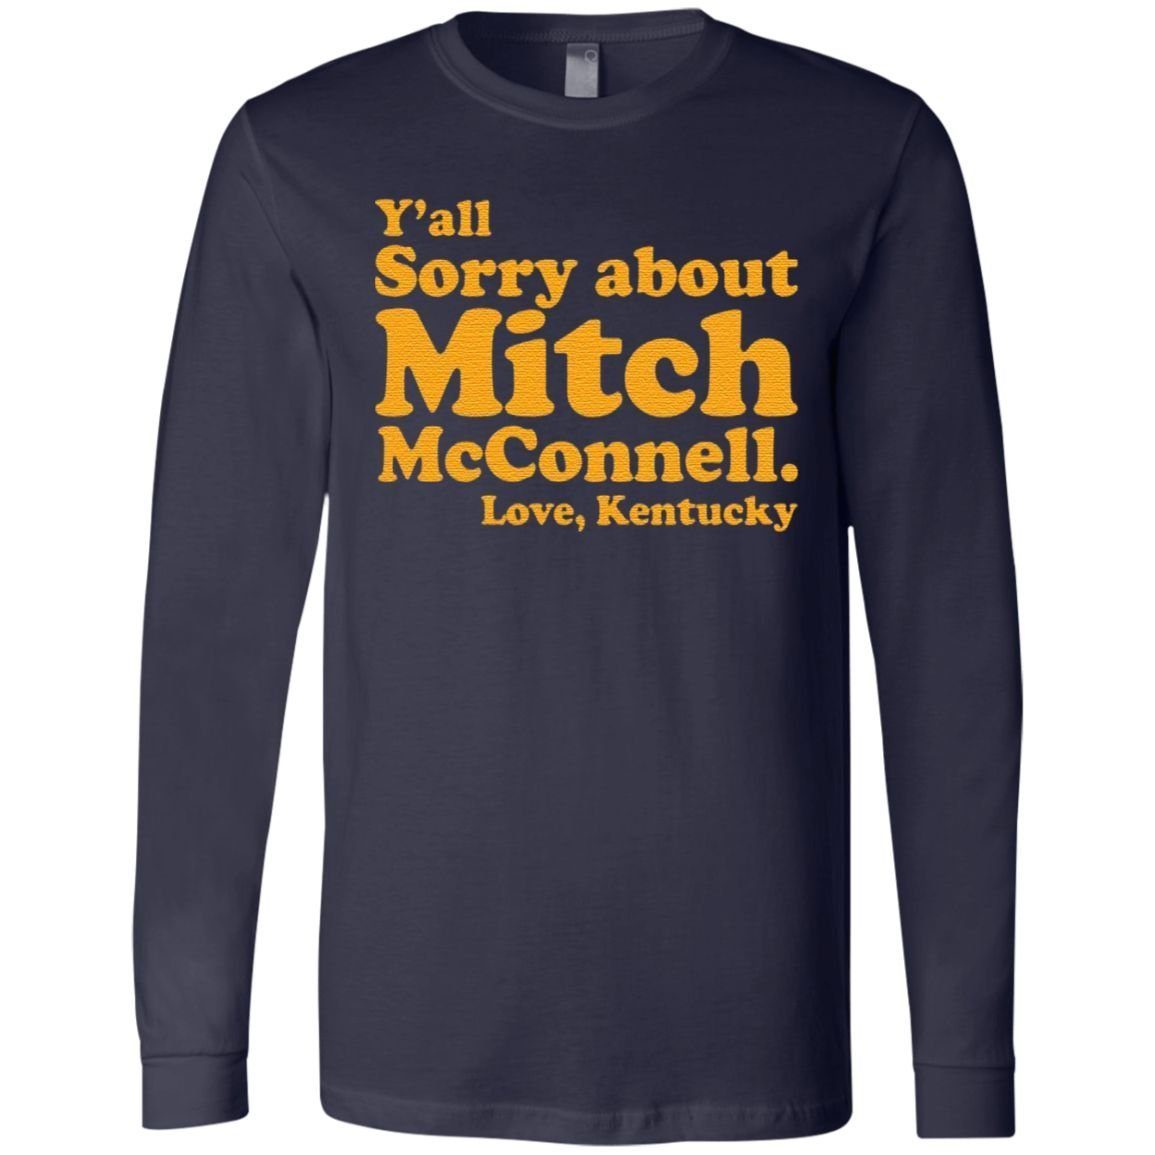 Y’all sorry about Mitch McConnell love Kentucky t shirt